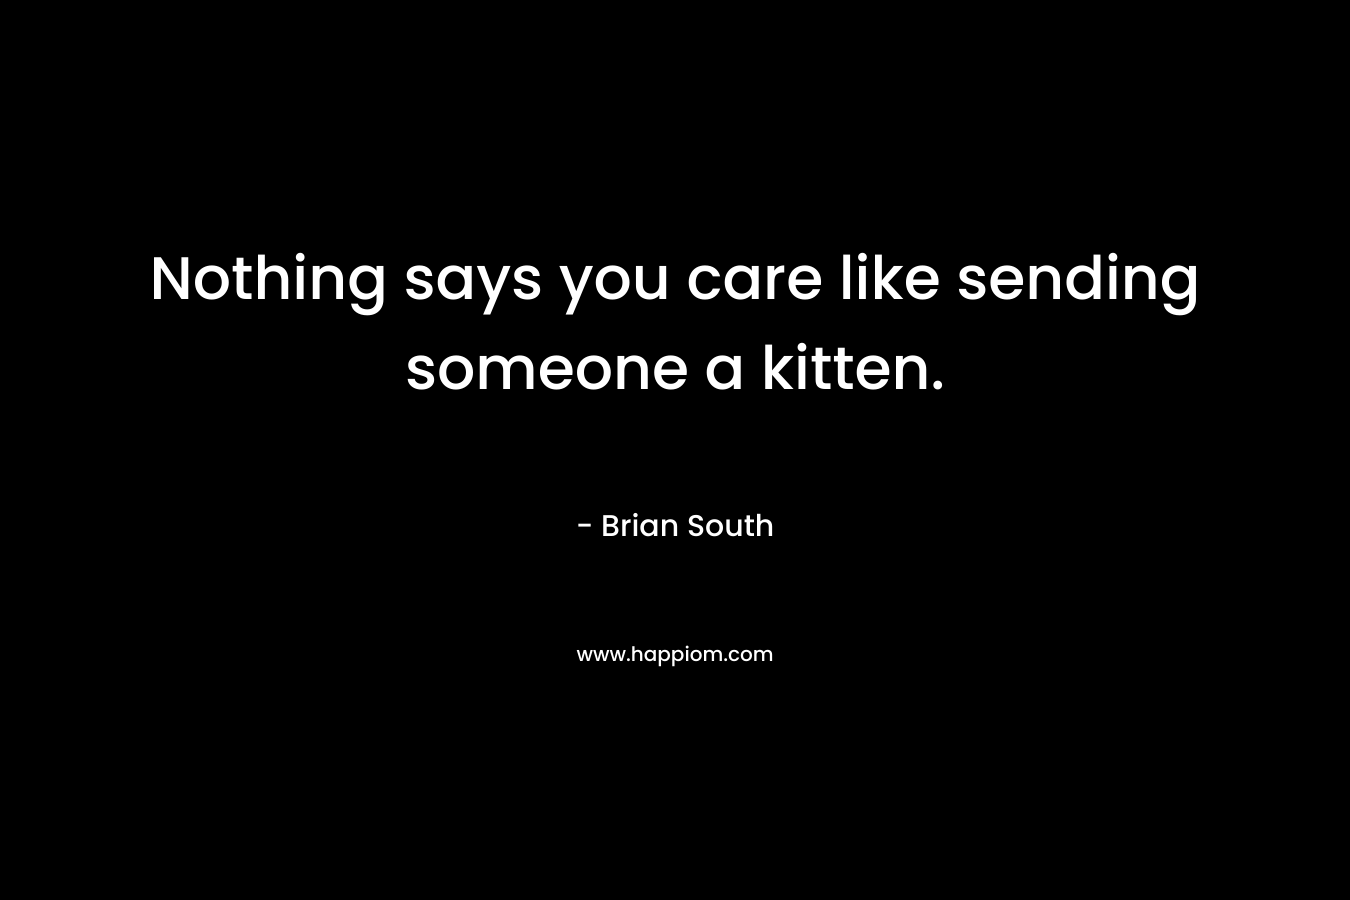 Nothing says you care like sending someone a kitten. – Brian South